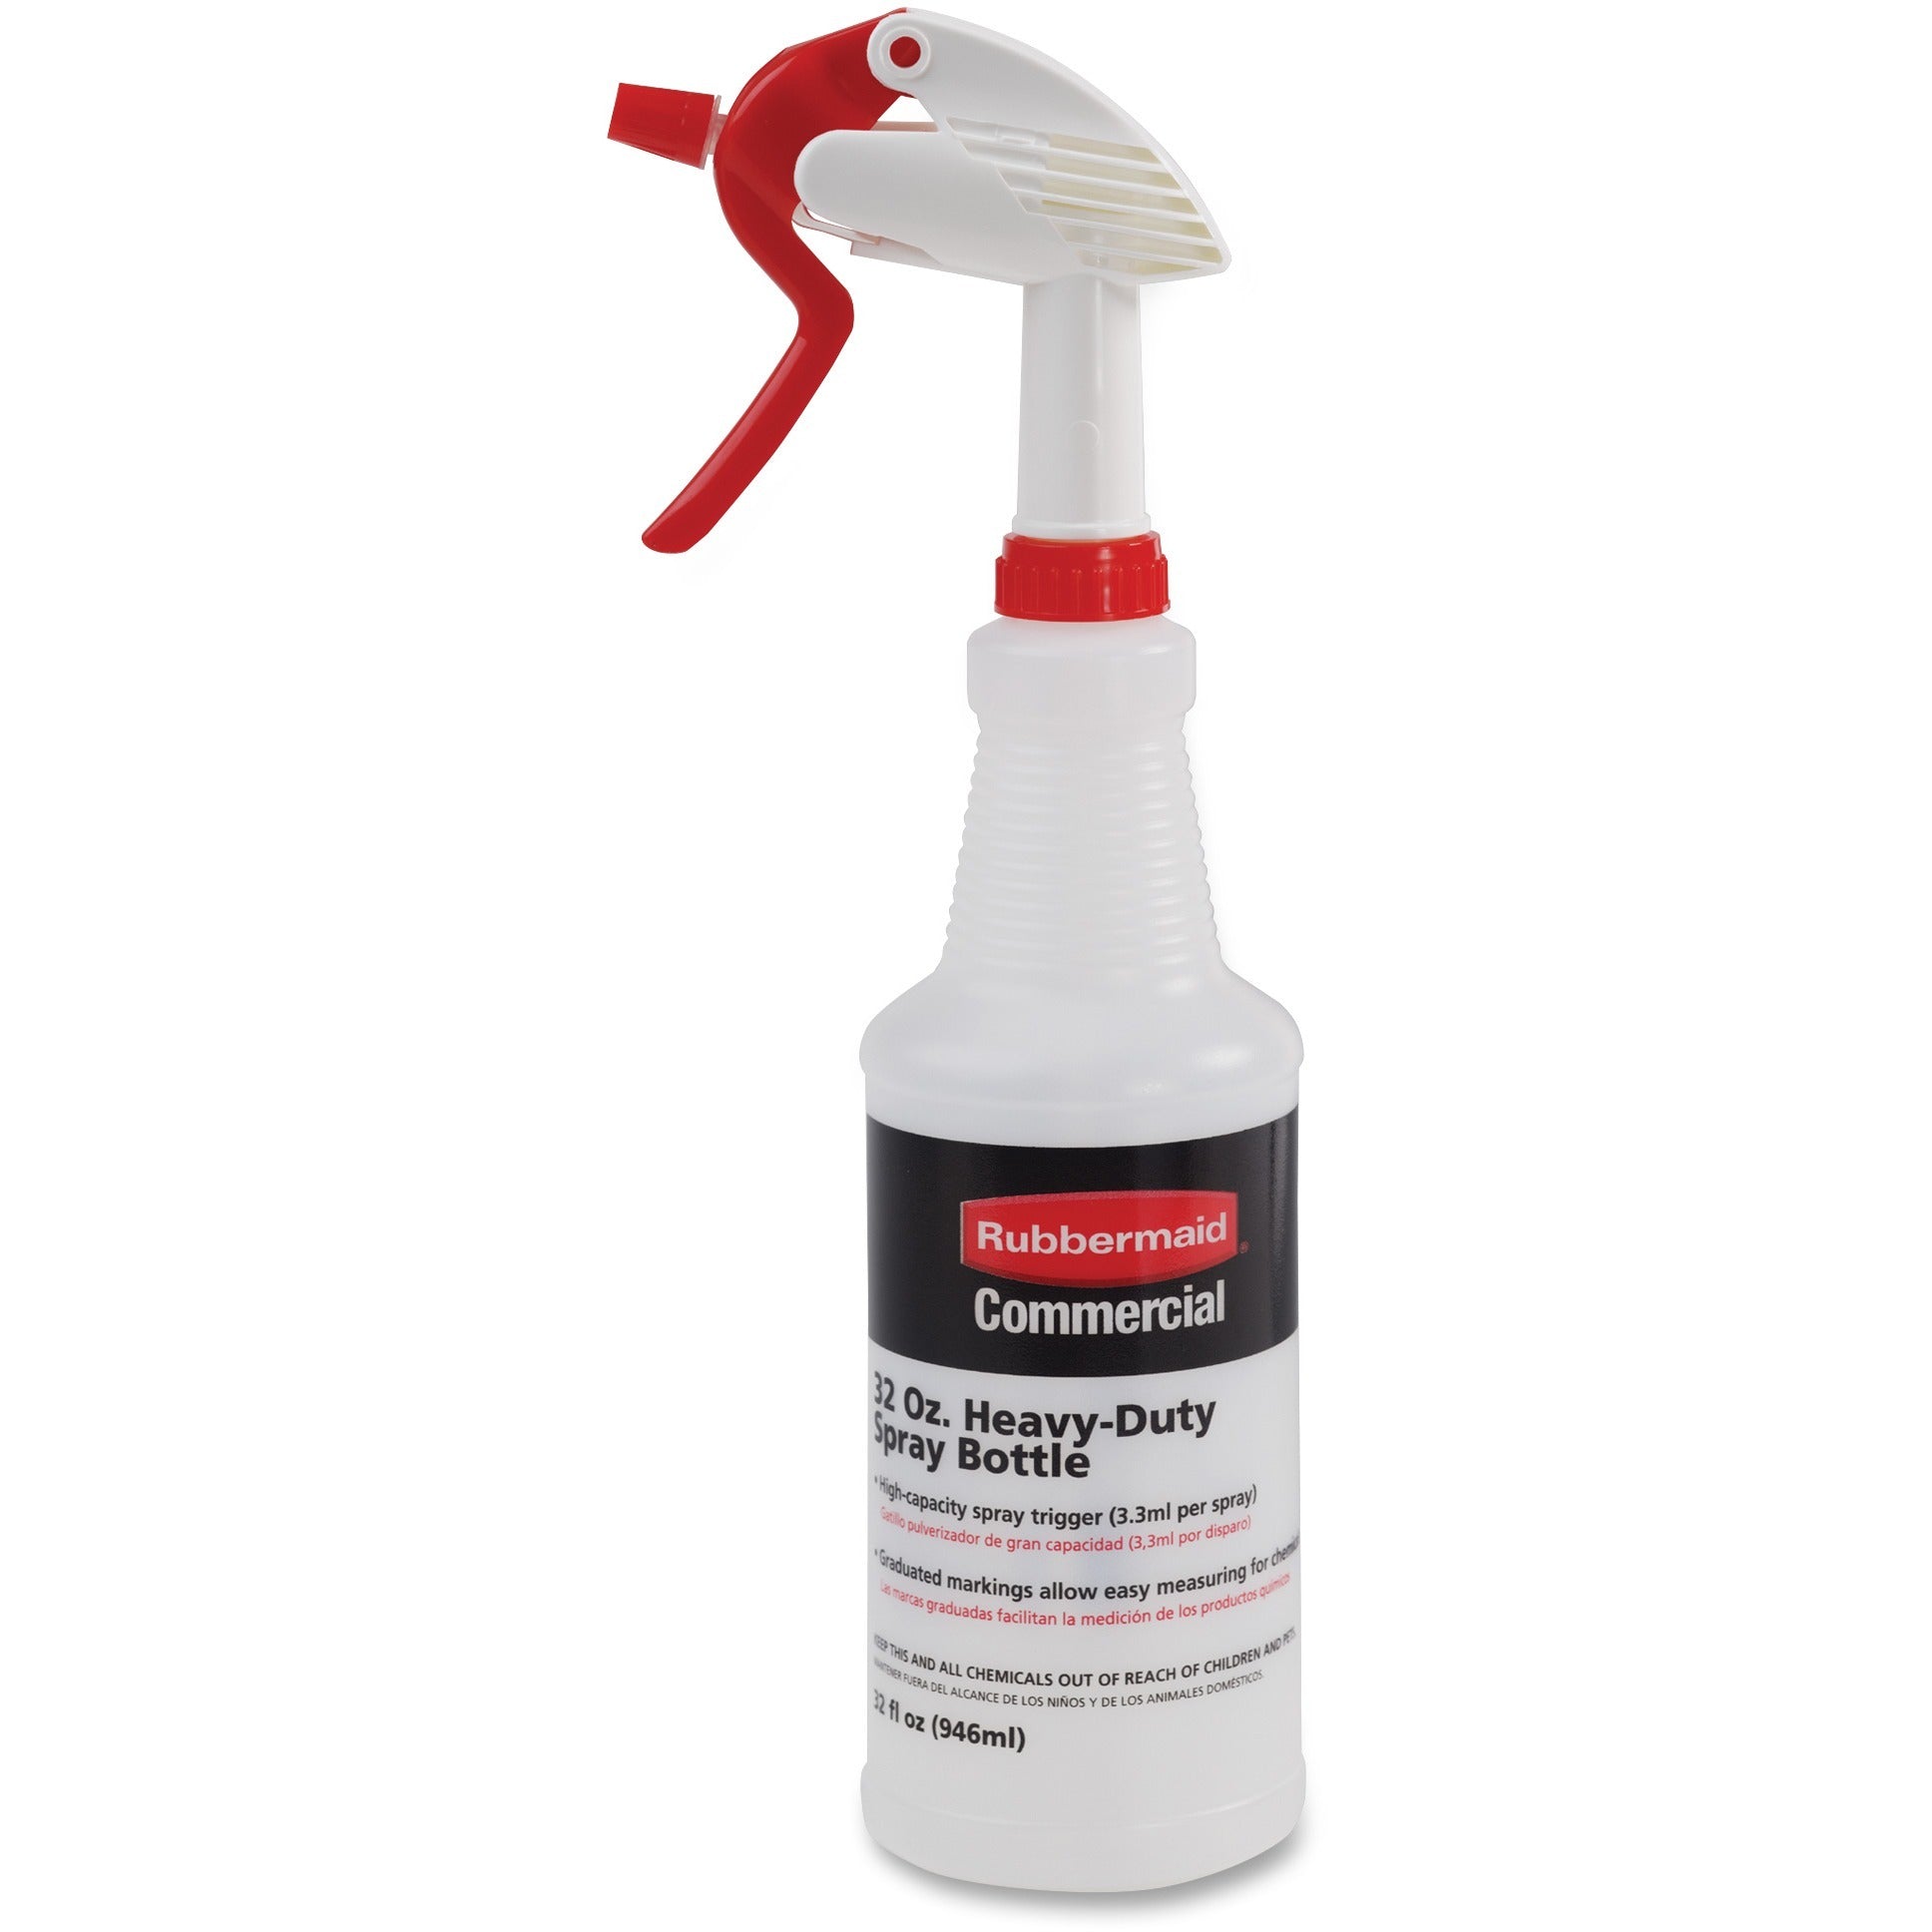 rubbermaid-commercial-32-oz-trigger-spray-bottle-suitable-for-cleaning-heavy-duty-96-height-34-width-6-carton-clear_rcp9c03060000ct - 2